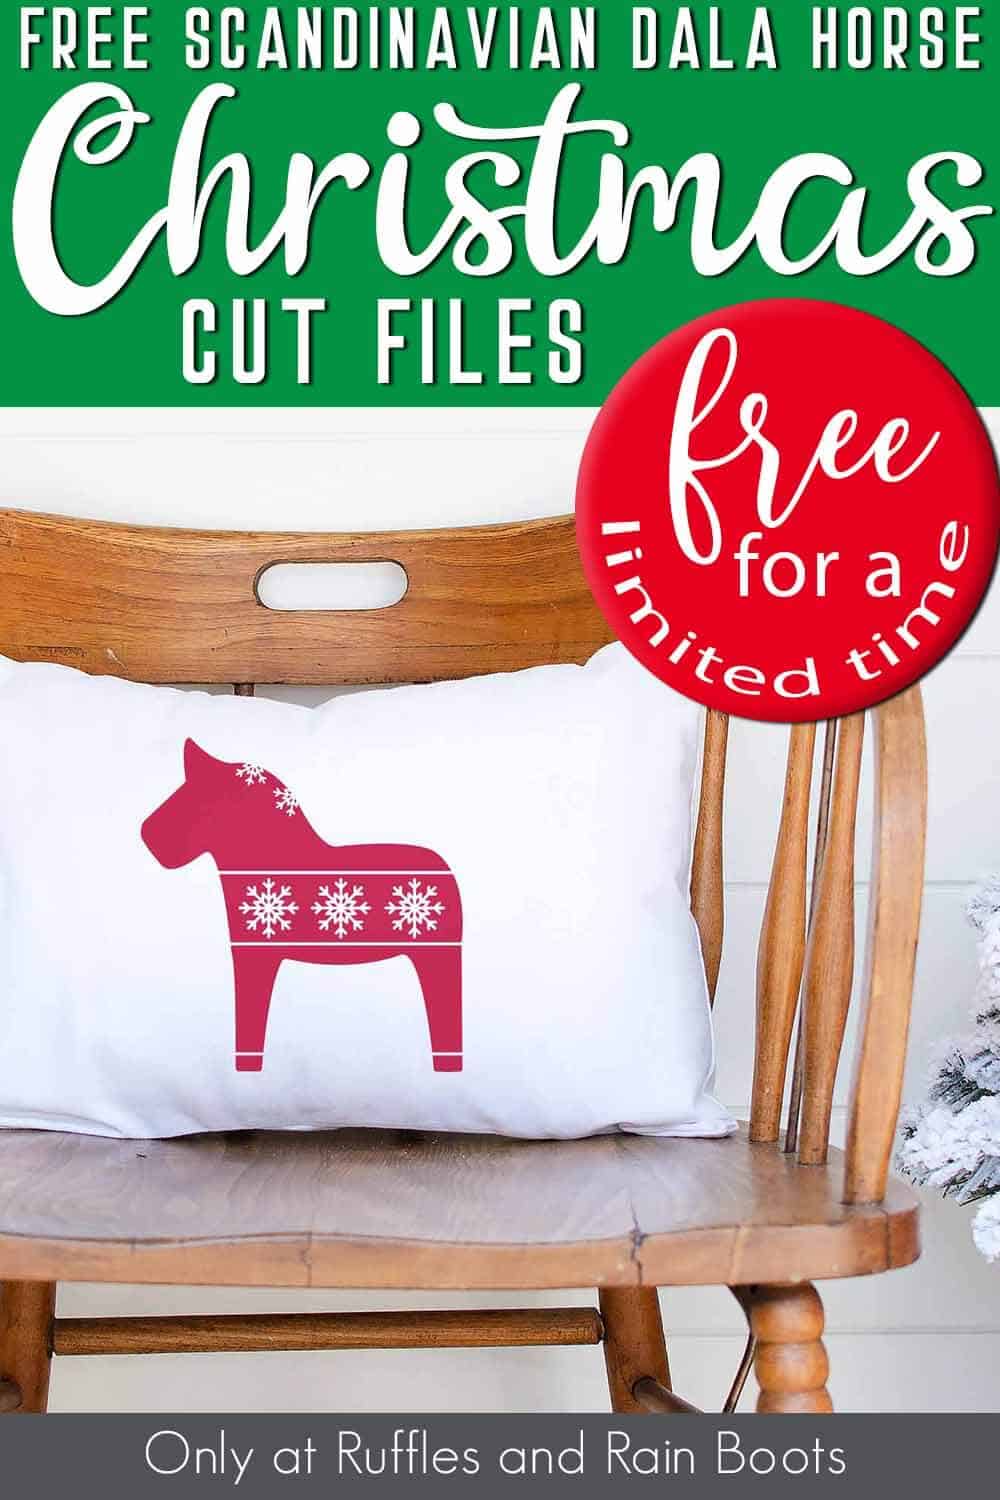 pillow on a chair with the scandinavian dala horse free holiday cut file on it with text which reads free scandinavian dala horse christmas cut files free for a limited time